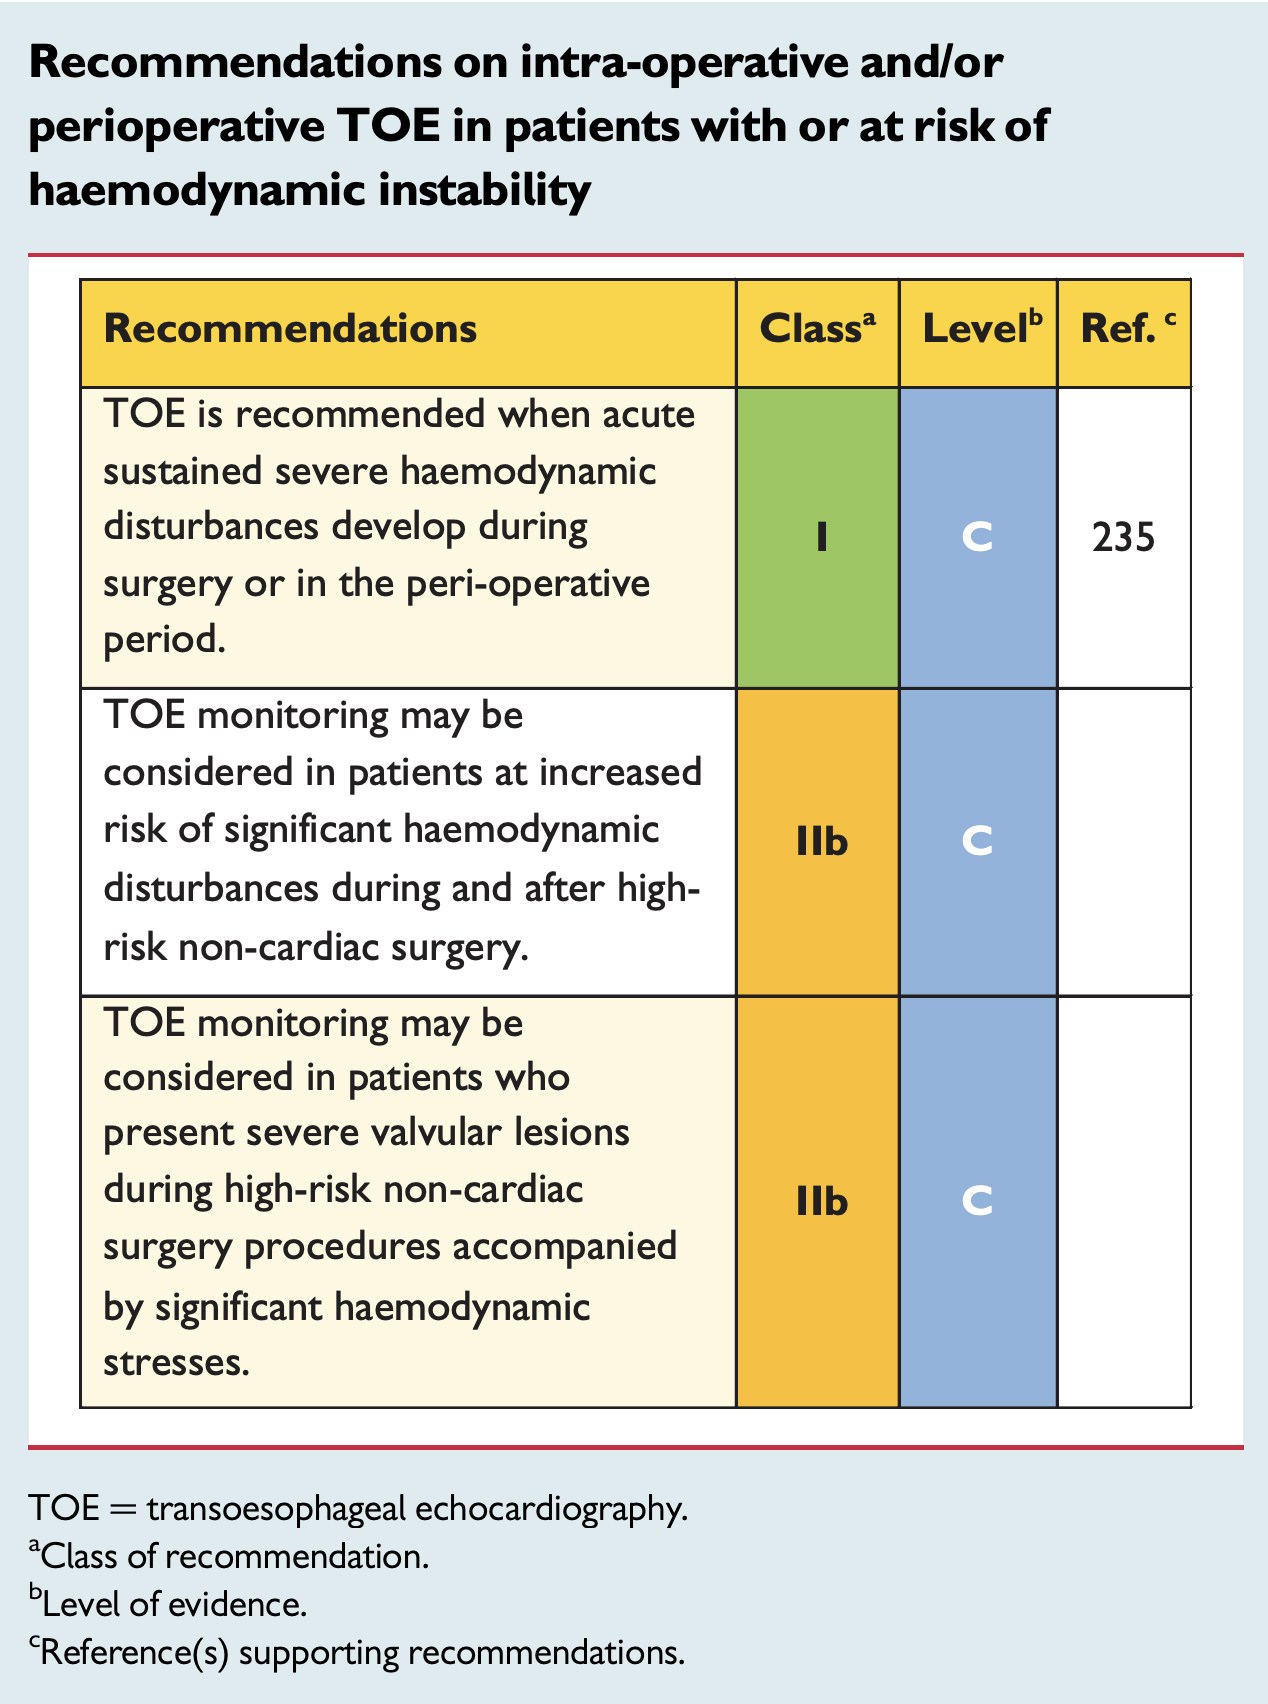 Recommendations on intra-operative and/or perioperative TOE in patients with or at risk of haemodynamic instability